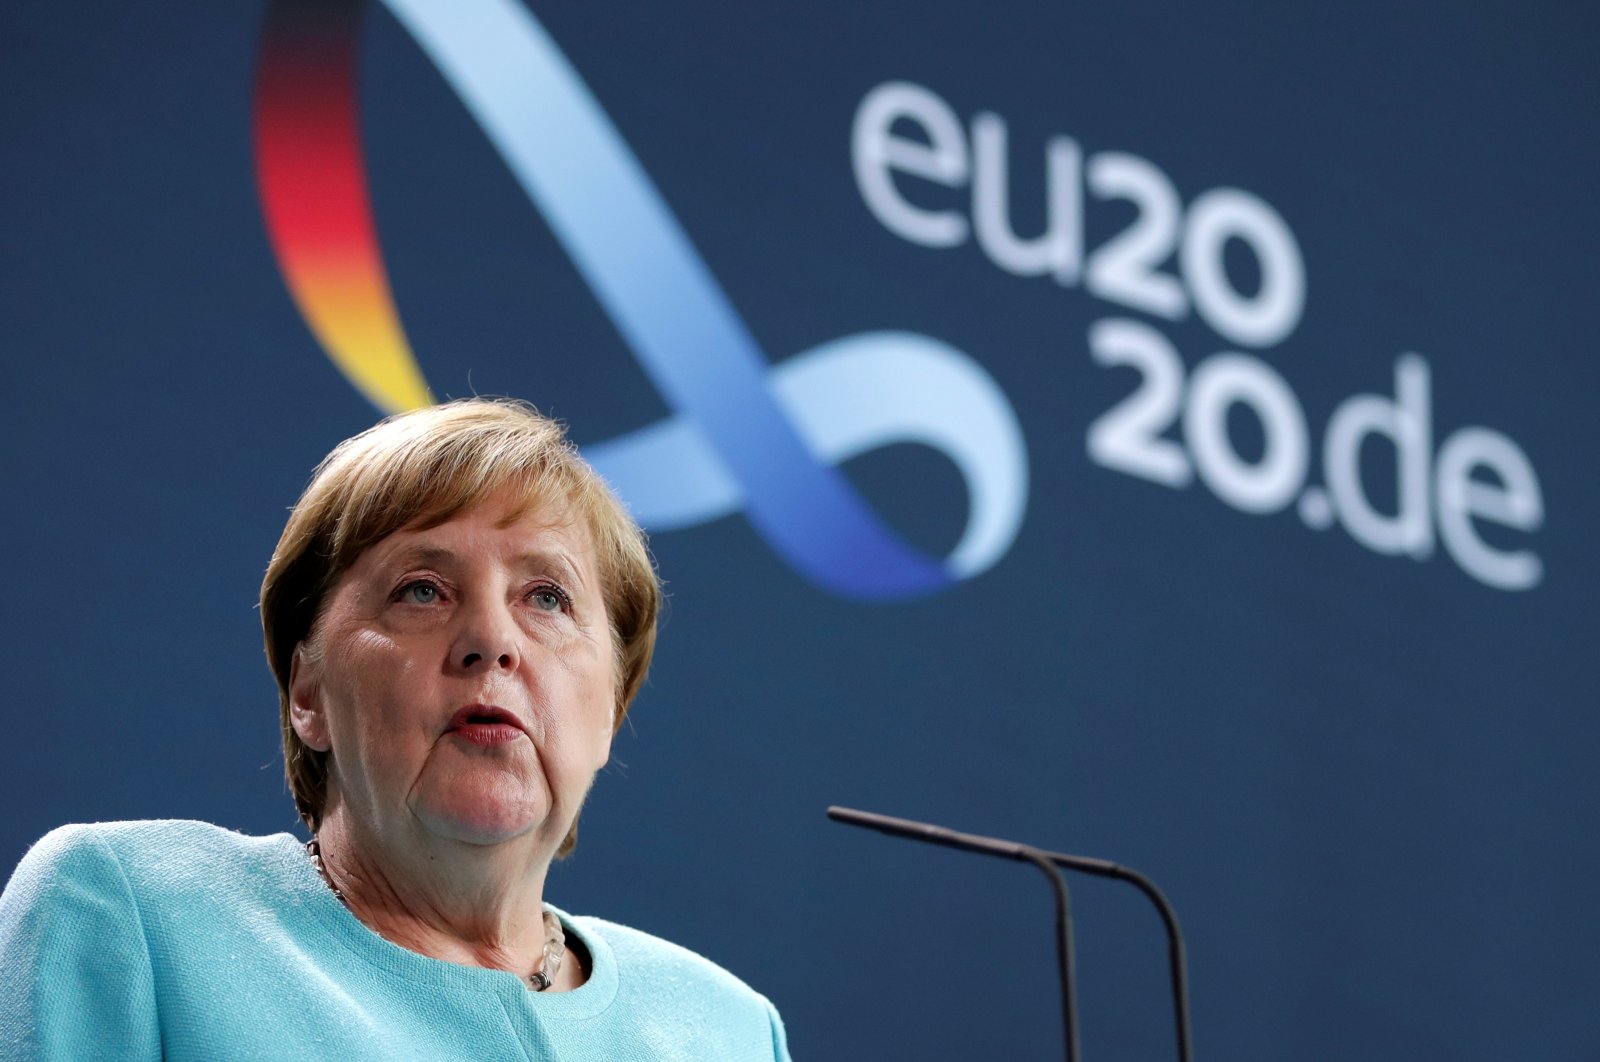 German Chancellor Angela Merkel speaks to reporters after EU leaders held a video summit on the situation in Belarus, at the Chancellery in Berlin, August 19, 2020.  (REUTERS)